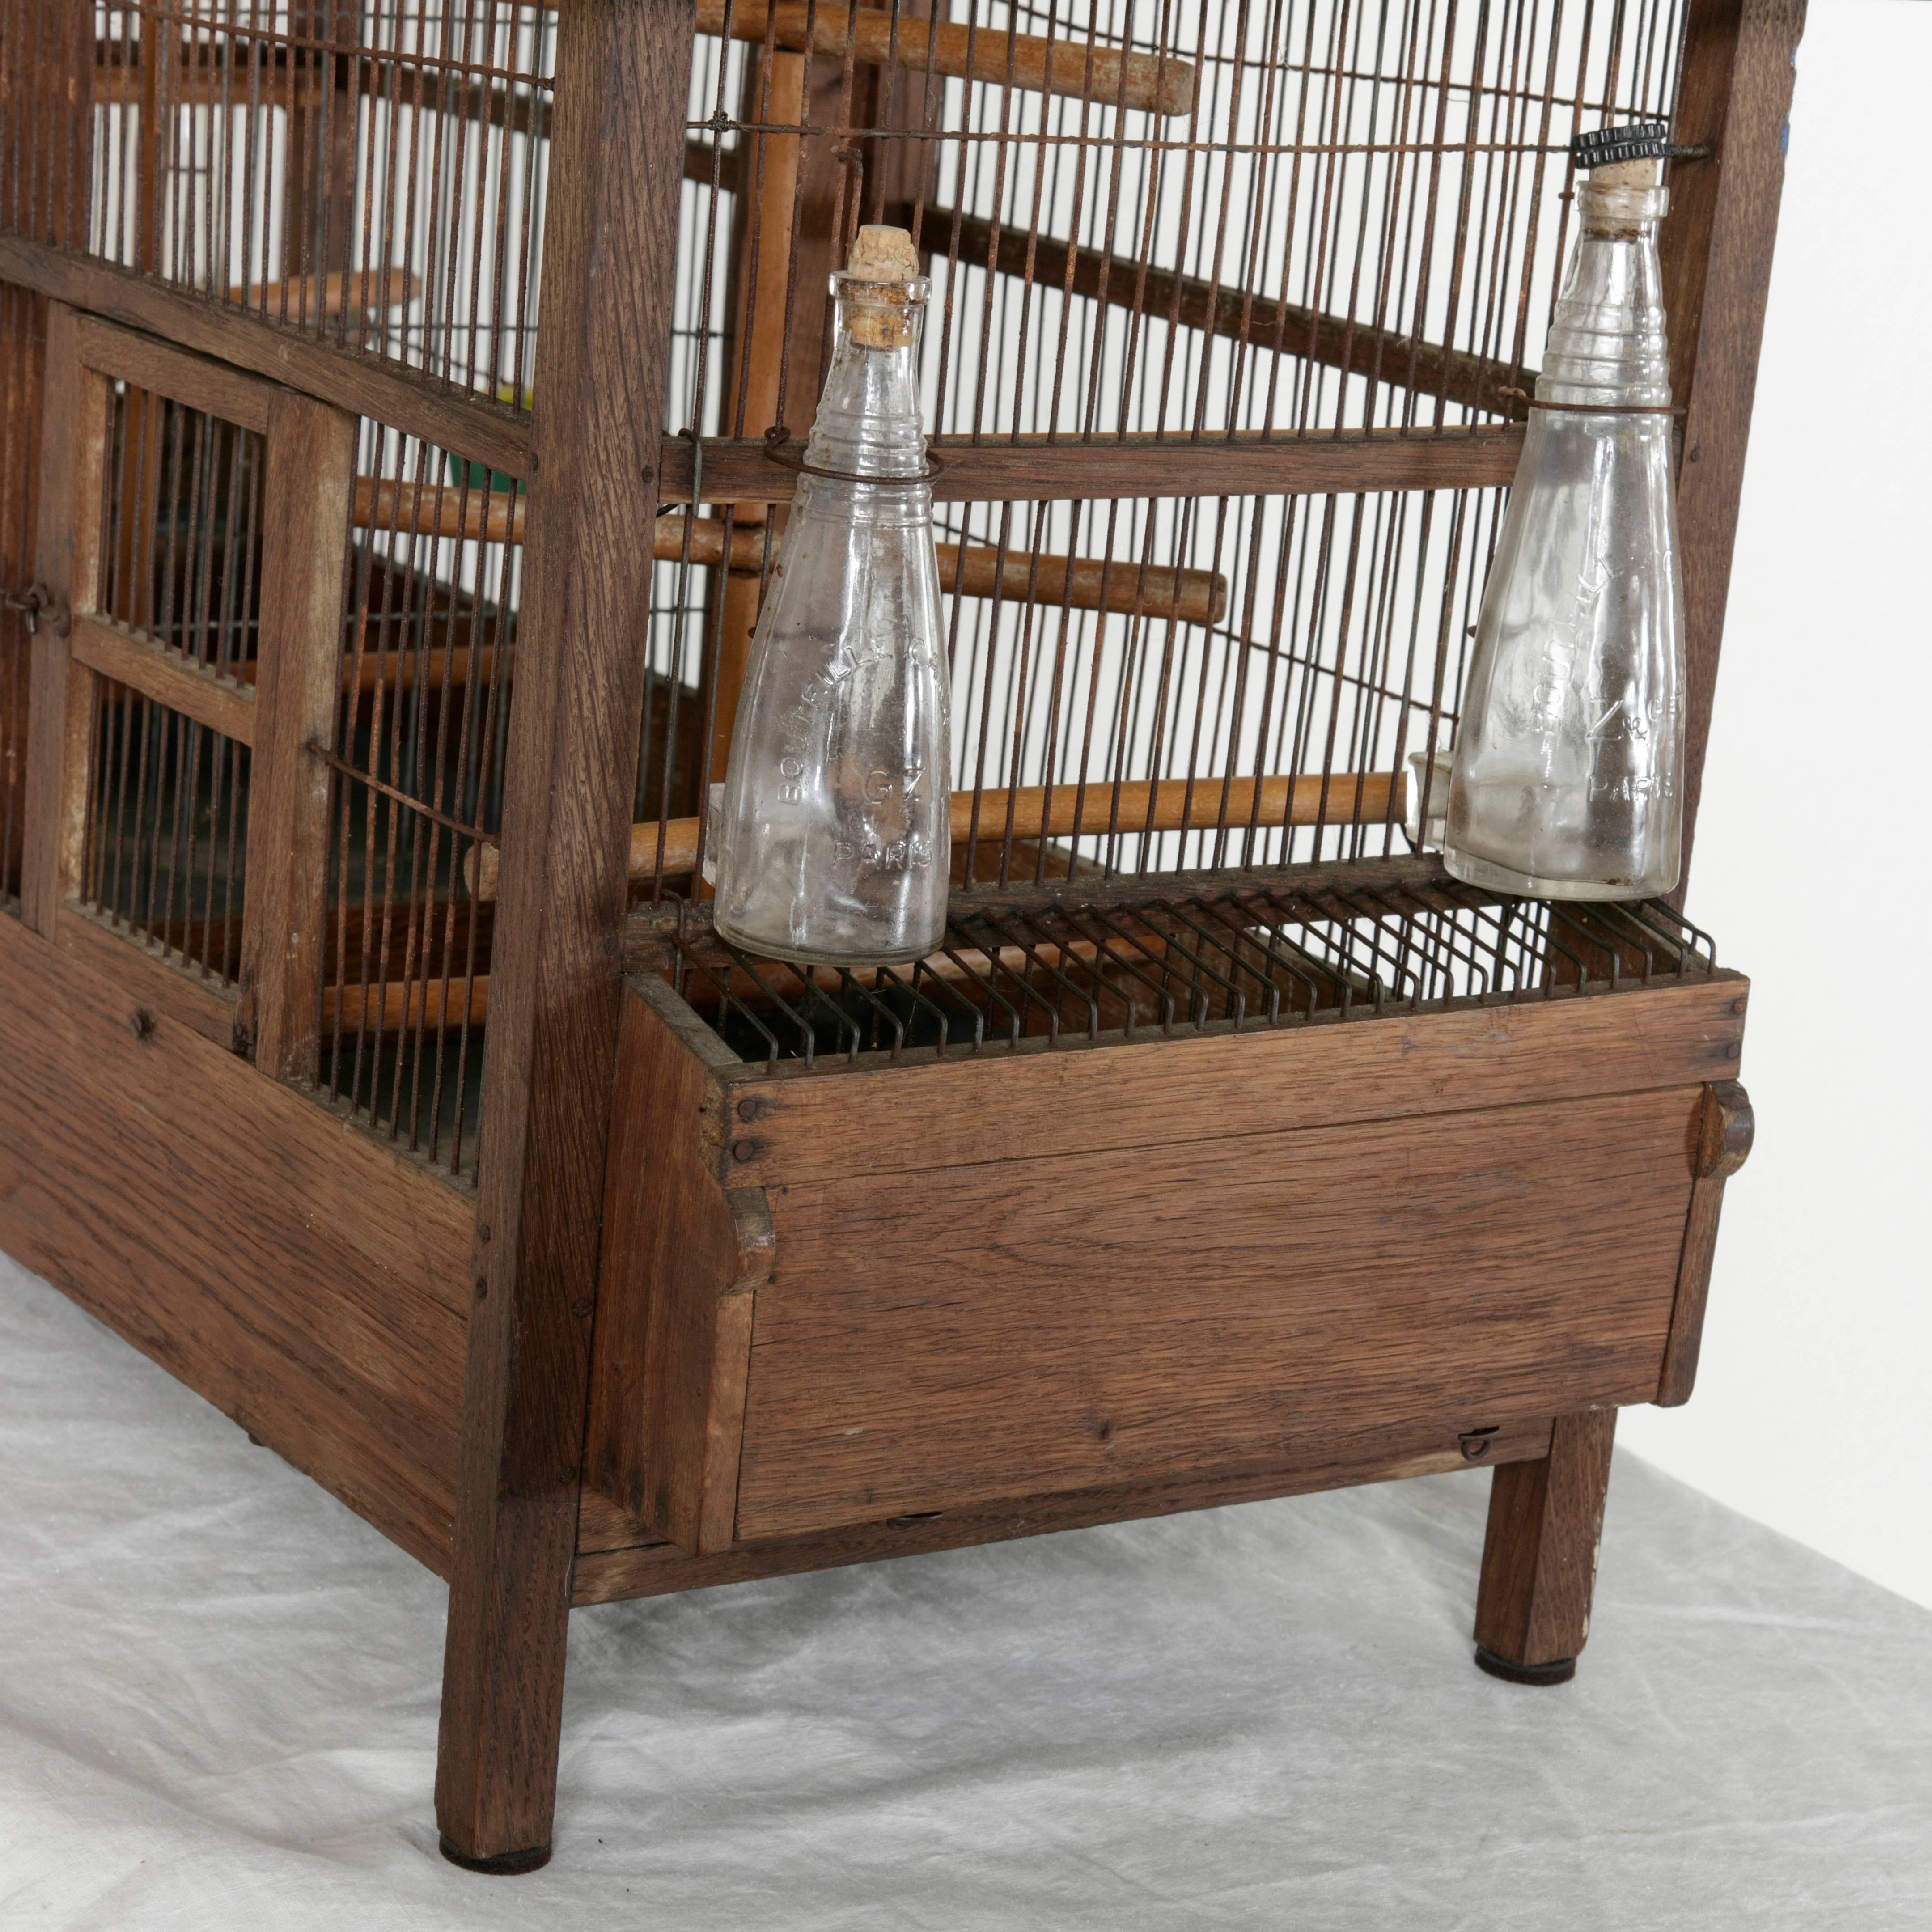 Early 20th Century Double Gabled Wood and Wire Birdcage with Two Compartments 2